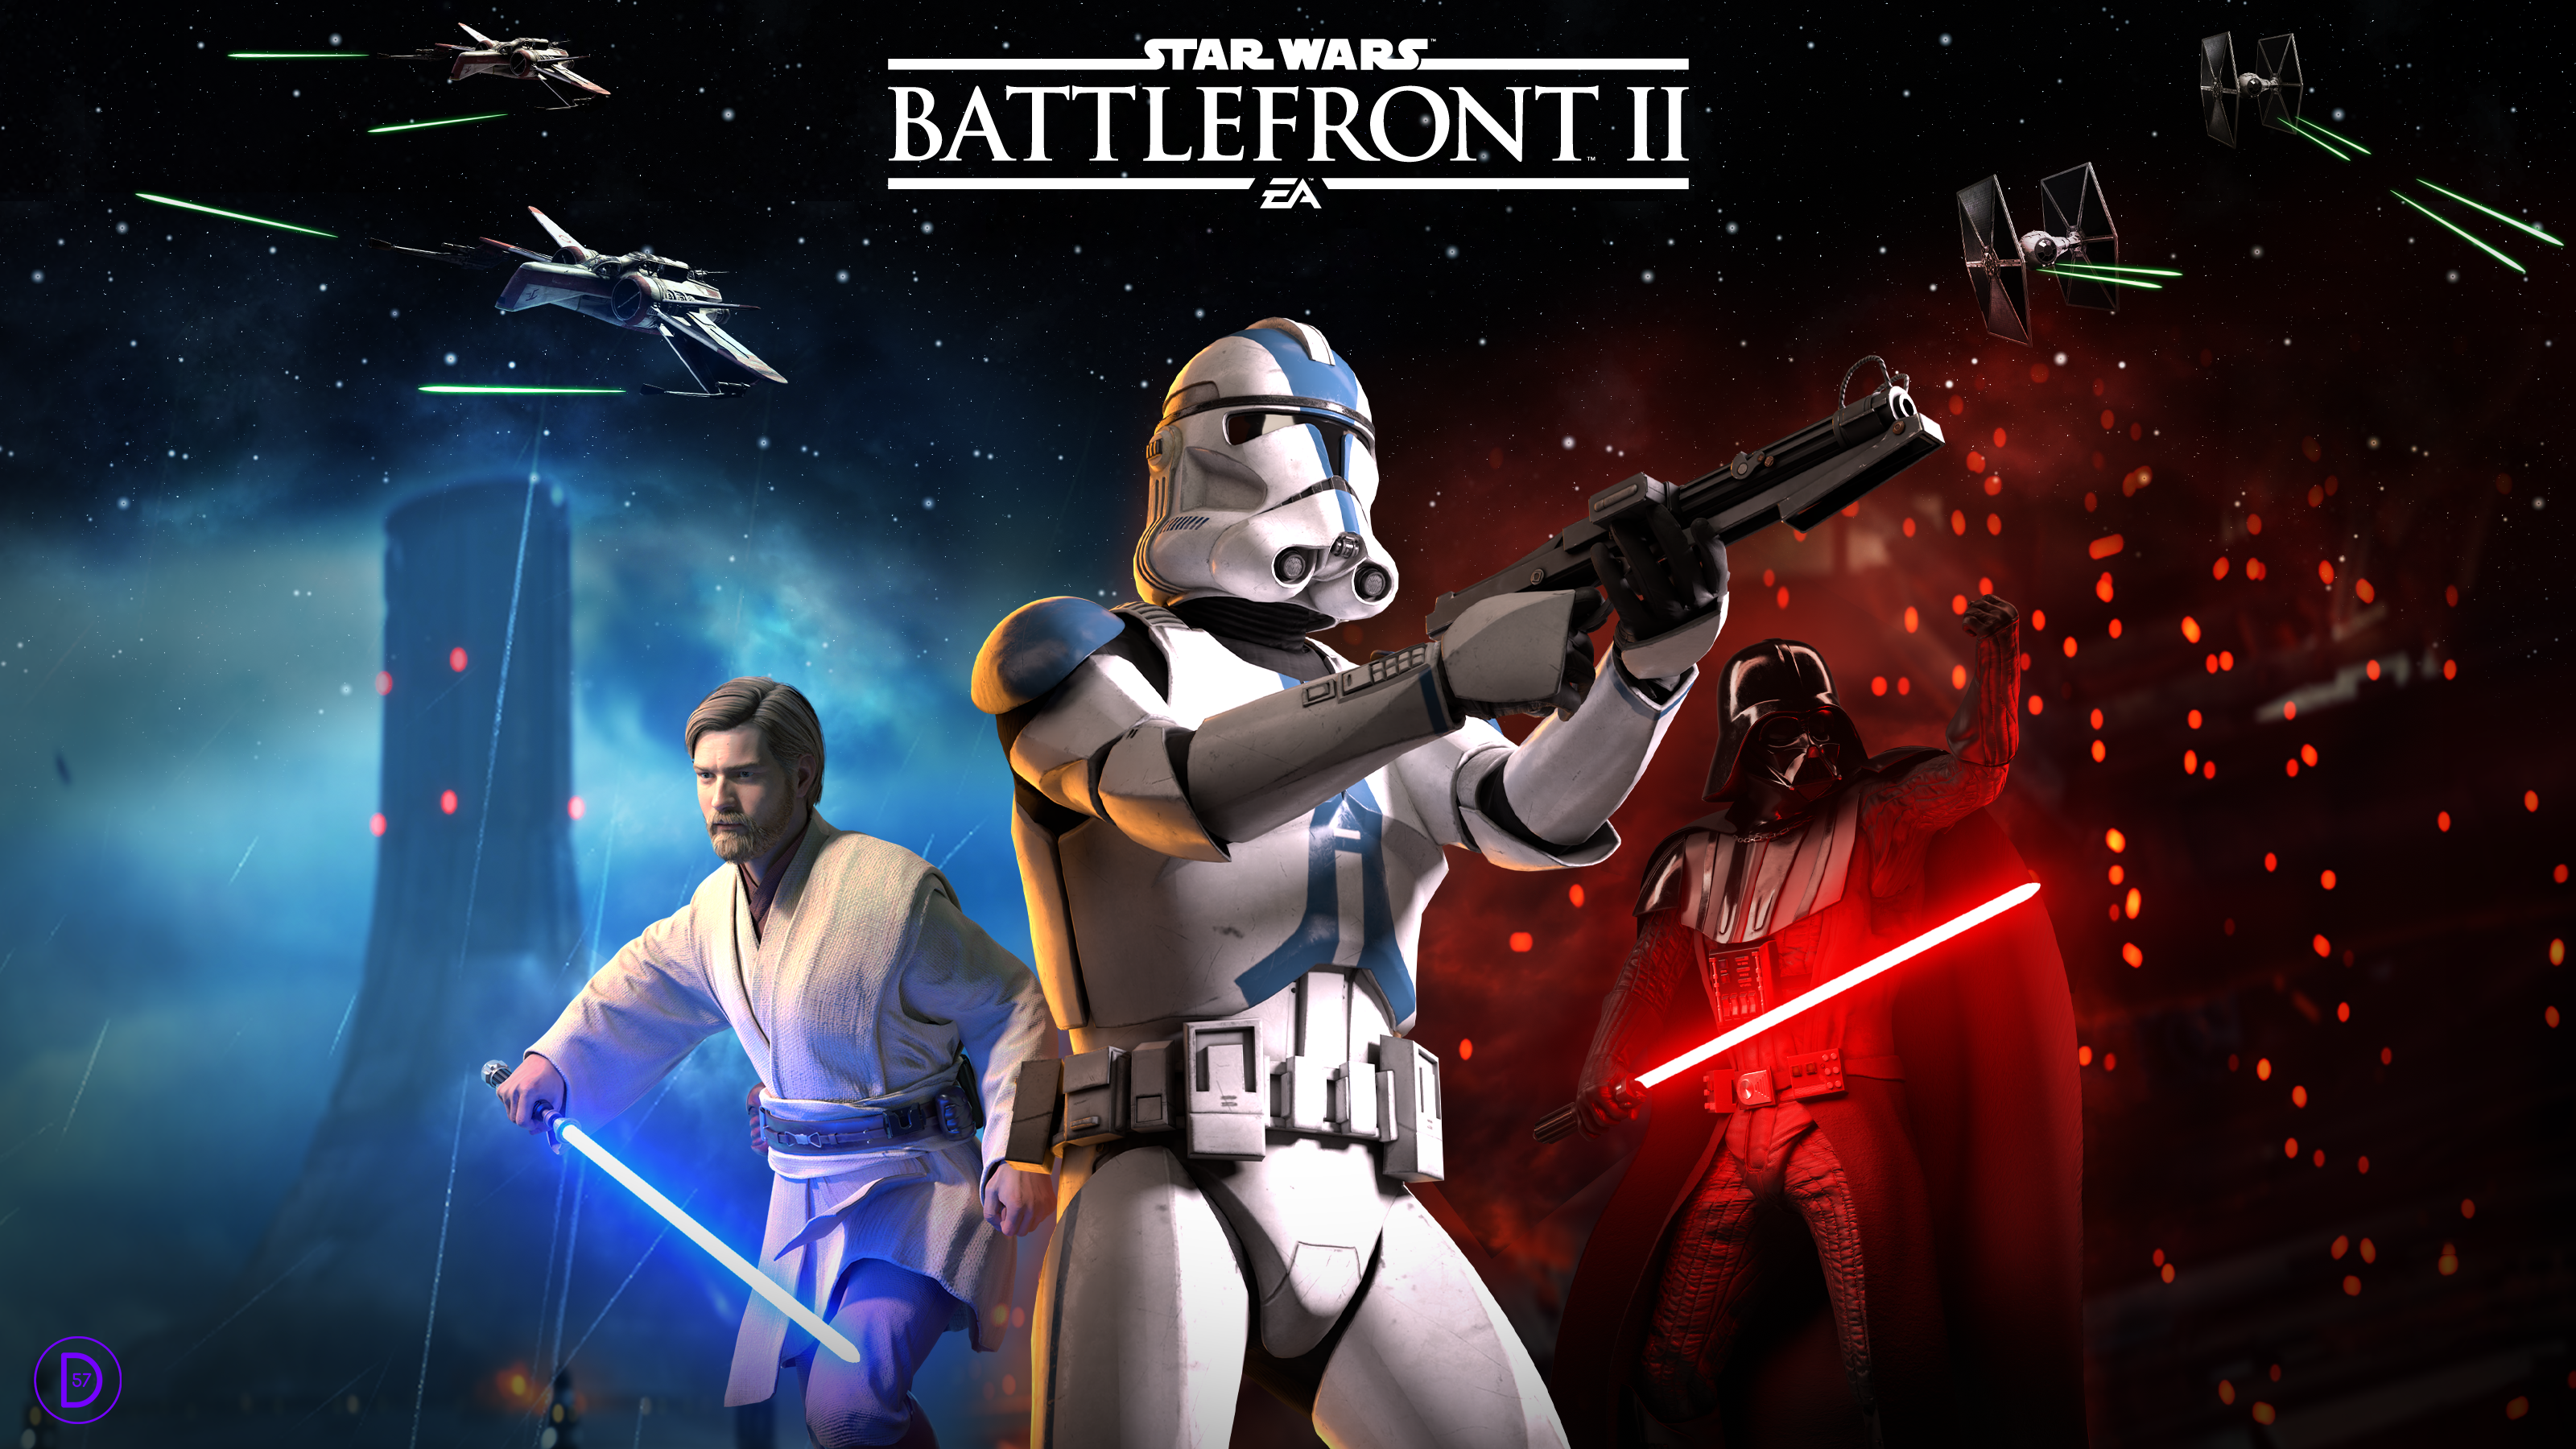 Battlefront 2005 Cover Recreation With Modern (2017) Logo Screen at Star Wars: Battlefront II (2017) Nexus and community